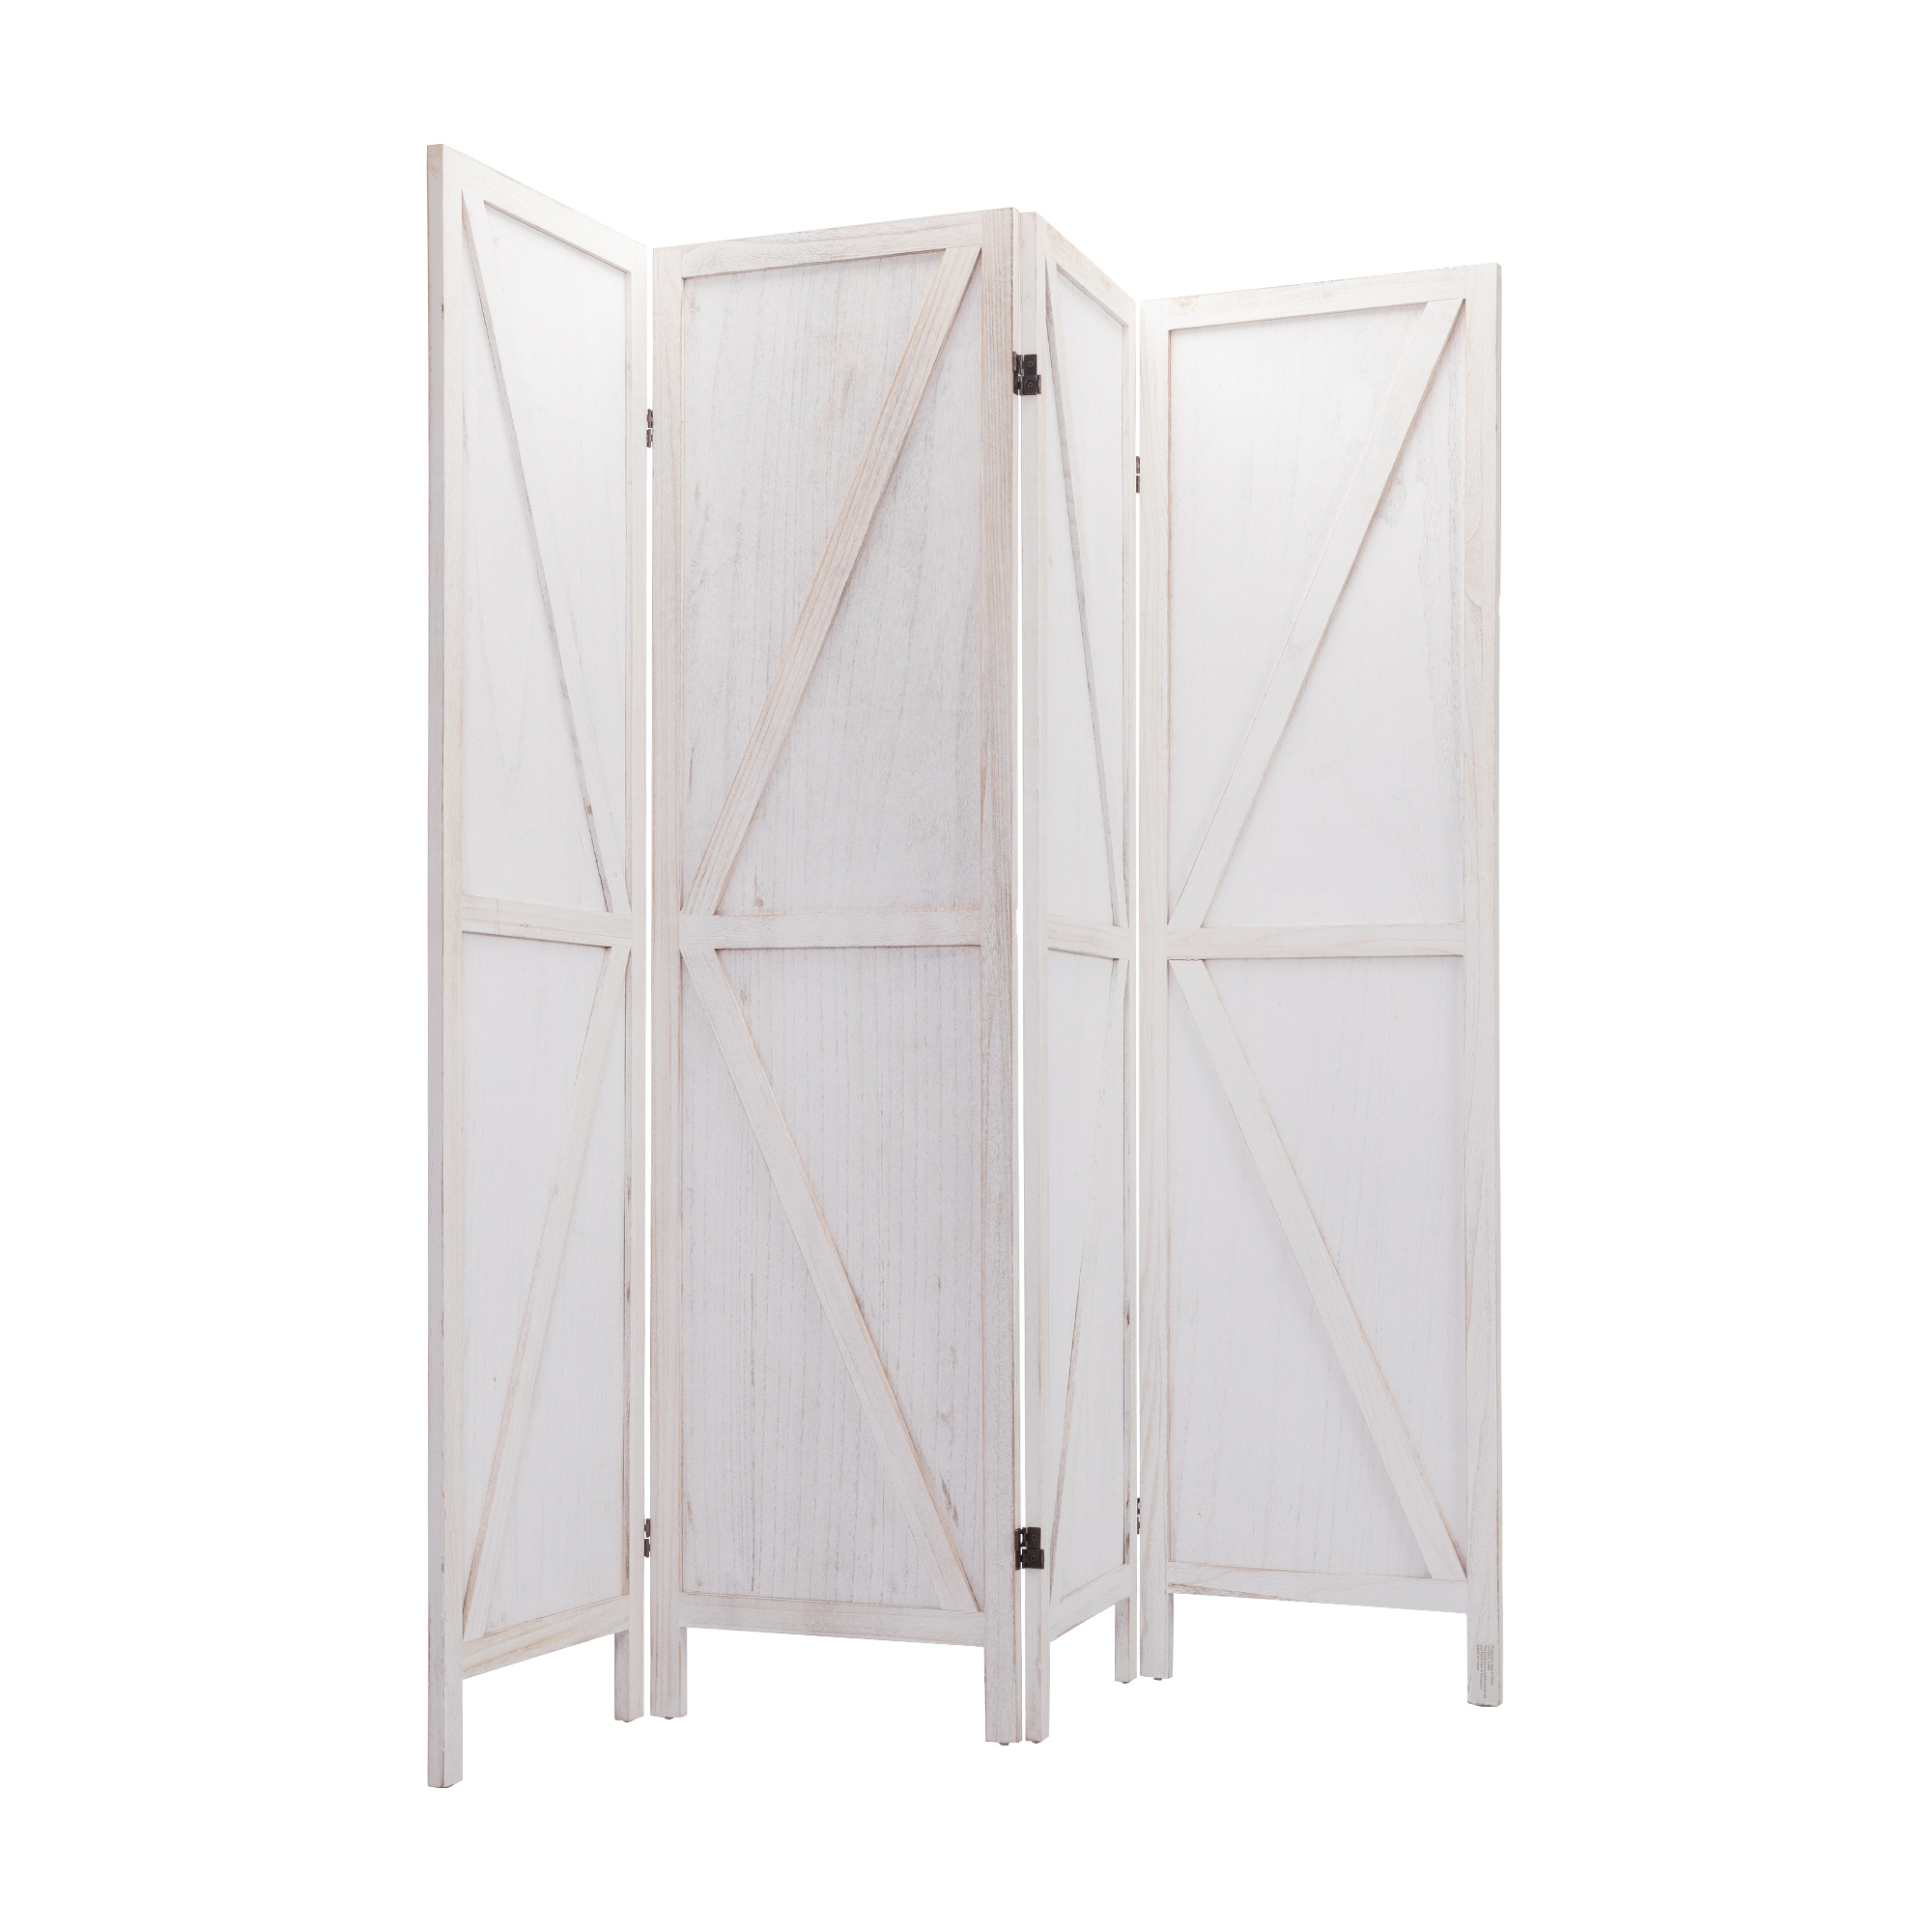 UWR-Nite Room dividers and Folding Privacy Screens, Privacy Screen, Partition Wall dividers for Rooms, Room Separator, Temporary Wall, Folding Screen - image 5 of 7